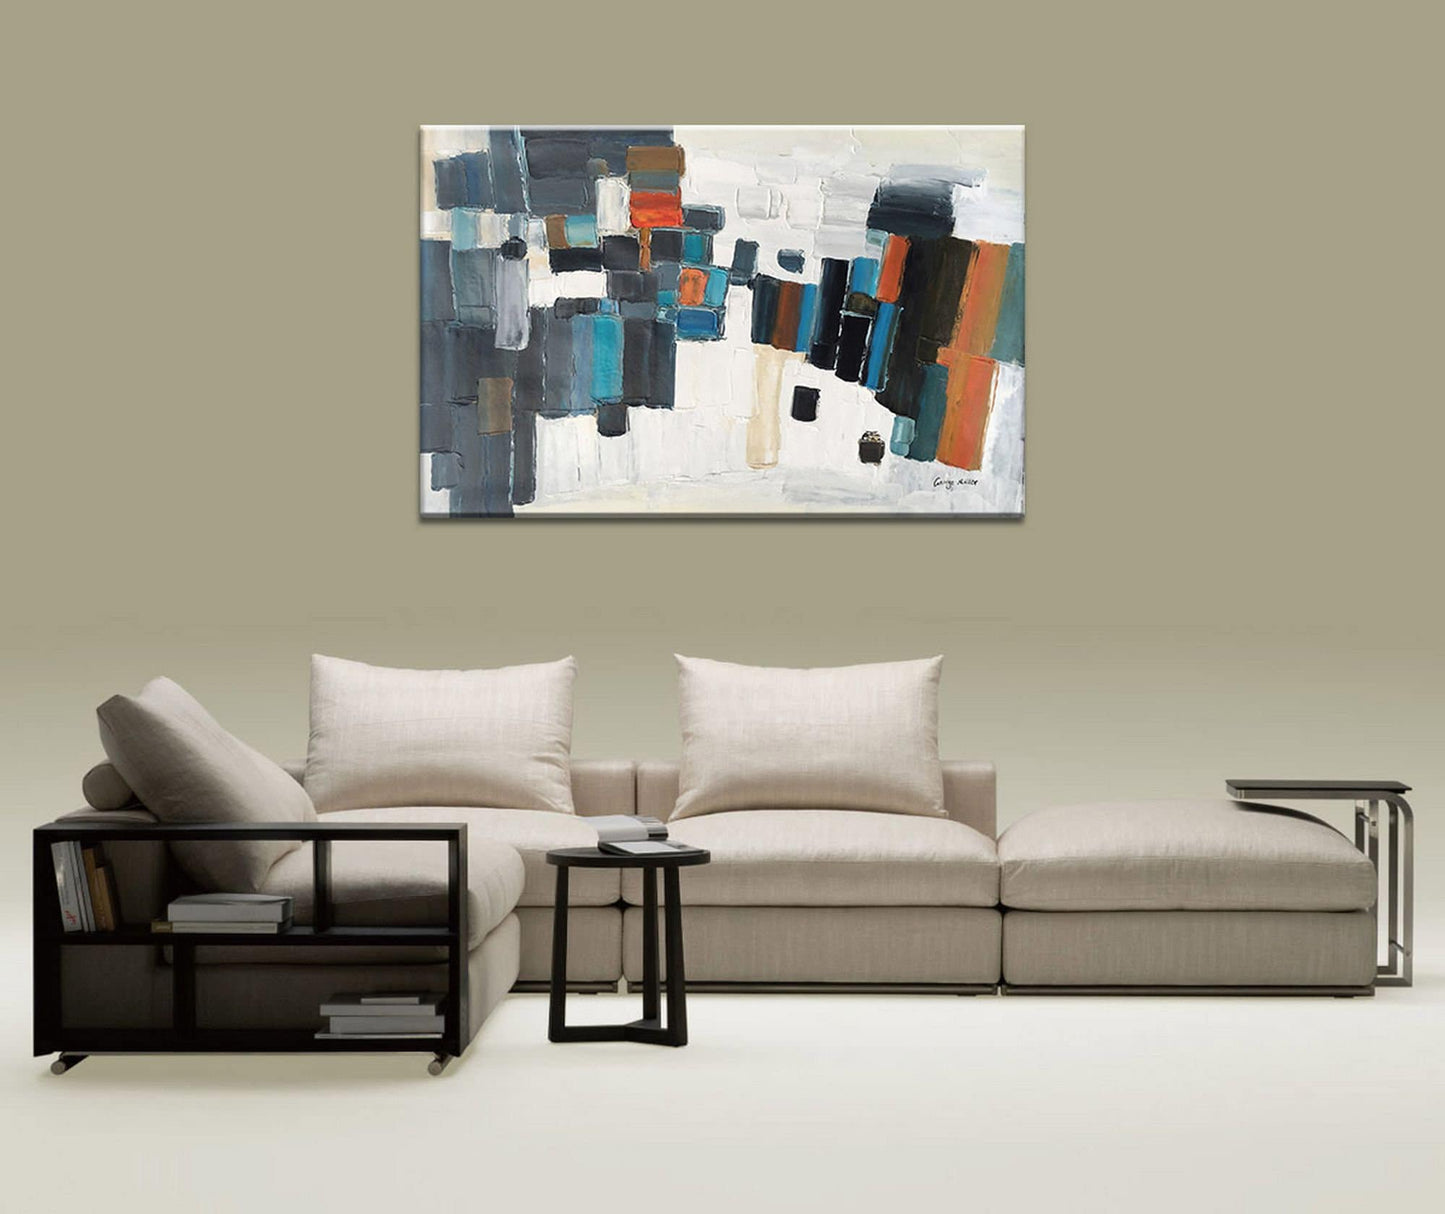 Large Abstract Oil Painting, Contemporary Painting, Large Abstract Painting, Black and White Art, Contemporary Wall Art, Canvas Painting